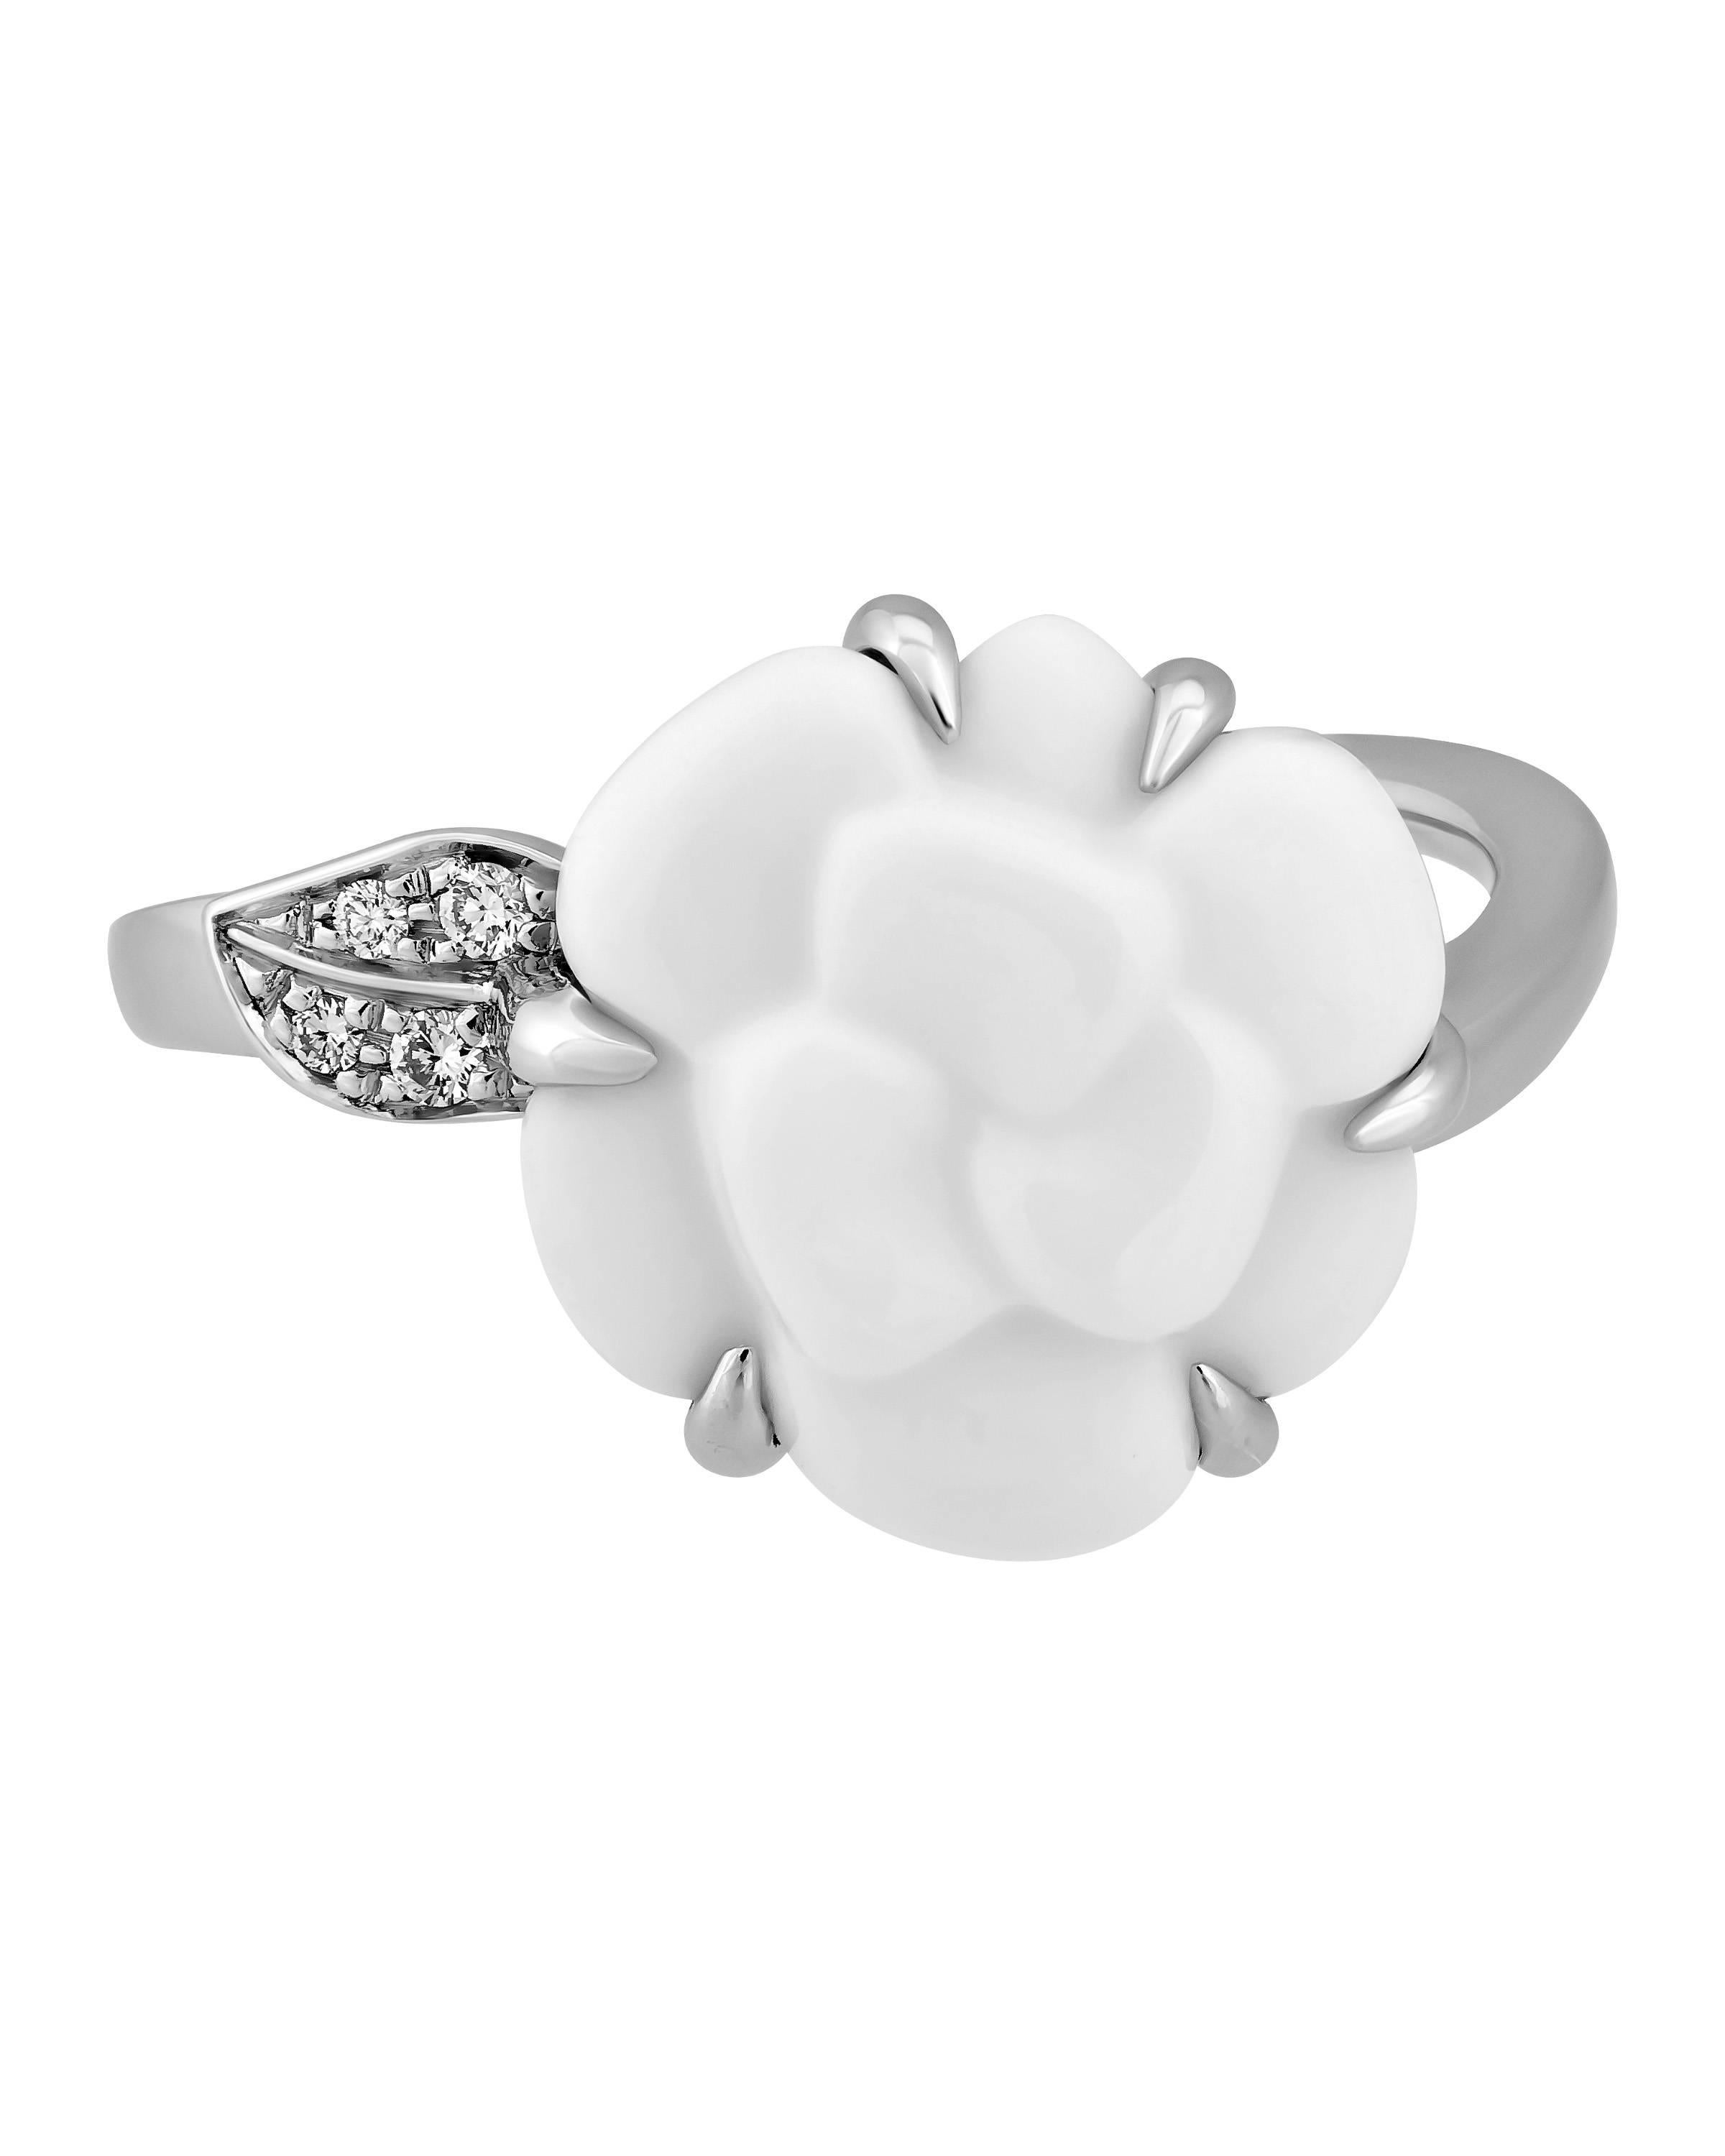 Gorgeous, translucent agate takes the form of a camellia, one of the loveliest flowers, in this elegant, breathtaking testament to the way that jewelry can merge the worlds of fashion and art.

METAL TYPE: 18K White Gold
STONE WEIGHT: 0.04ct